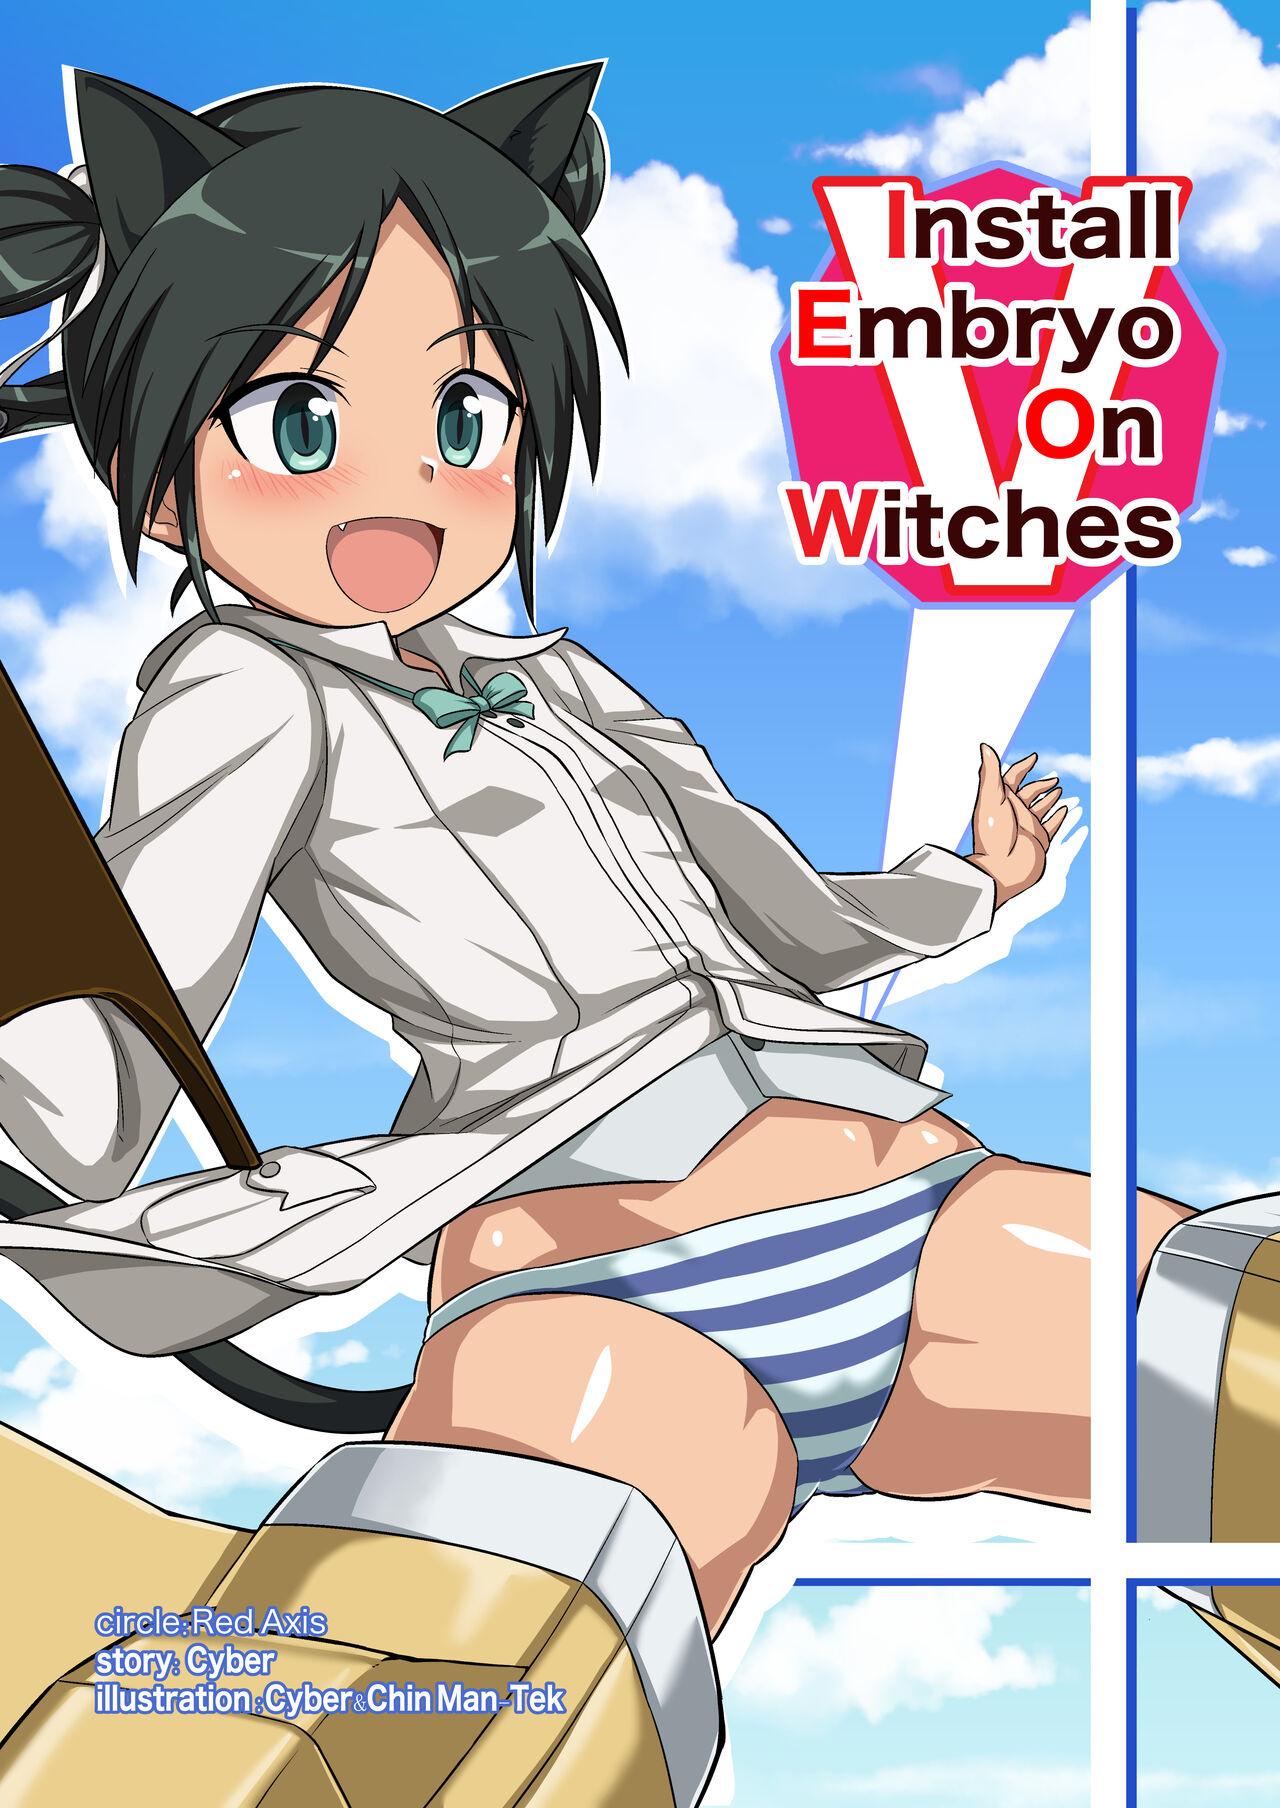 Install Embryo On Witches V [Red Axis] (ストライクウィッチーズ) [日本語、英語] 0